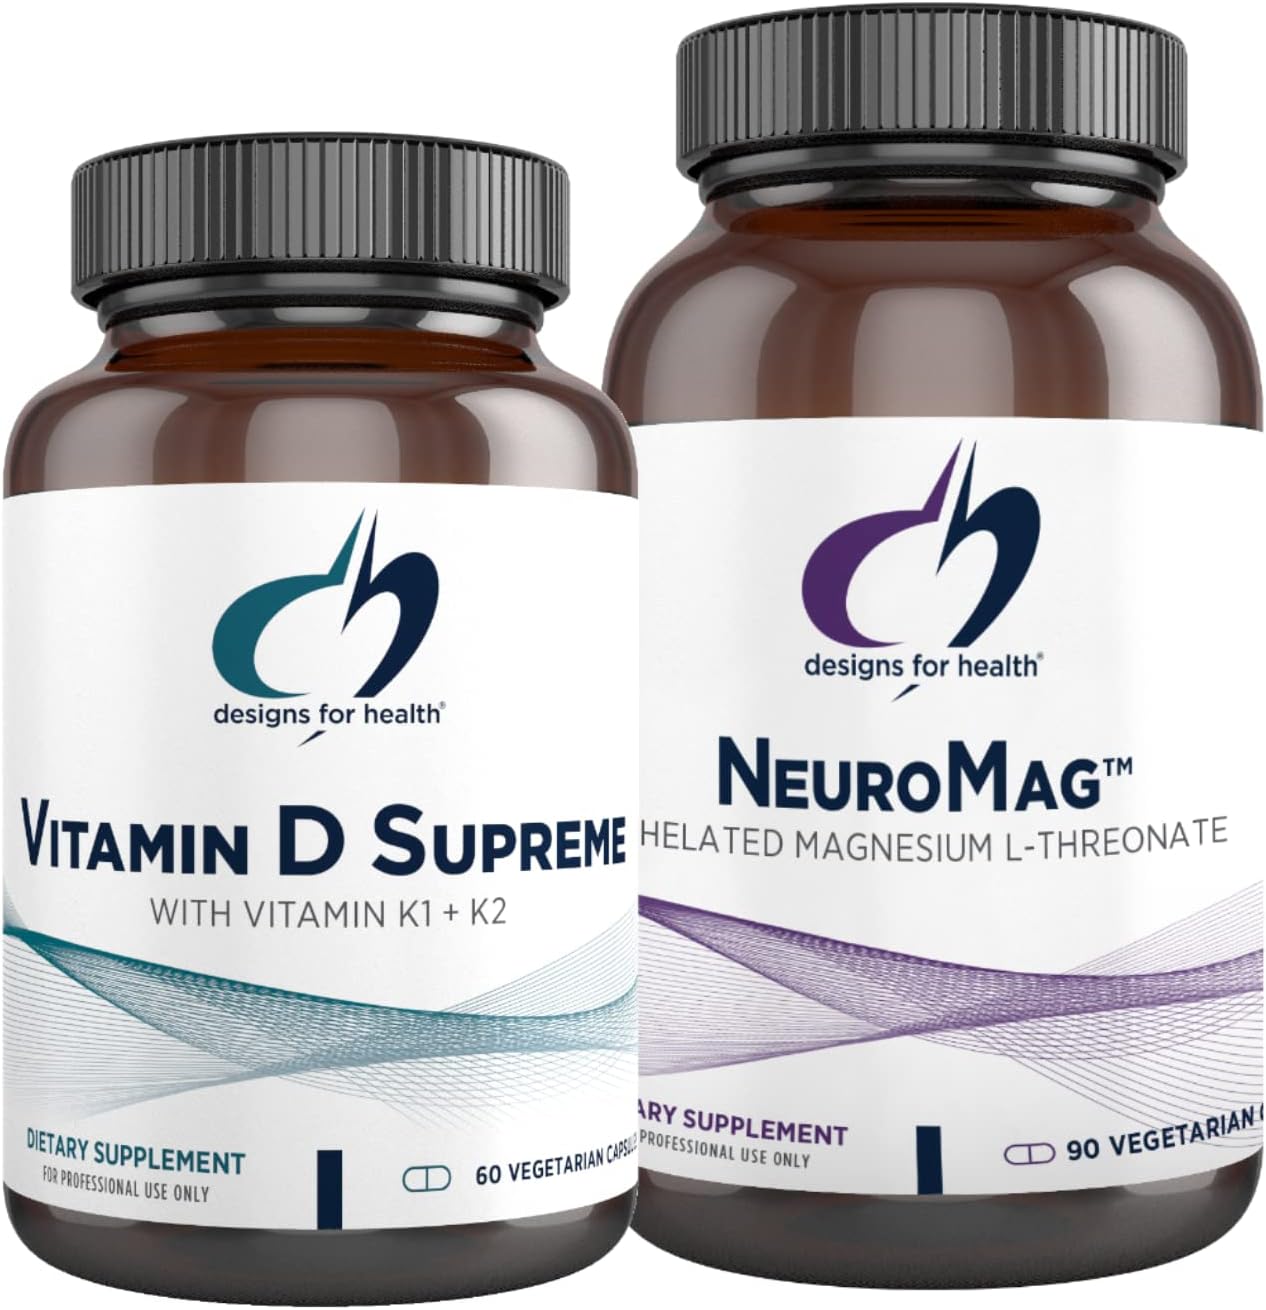 Designs for Health Vitamin D Supreme 5000 IU + Vitamin K (60 Capsules) + NeuroMag Chelated Magnesium L-Threonate for Cognitive Support (90 Capsules) - 2 Product Bundle